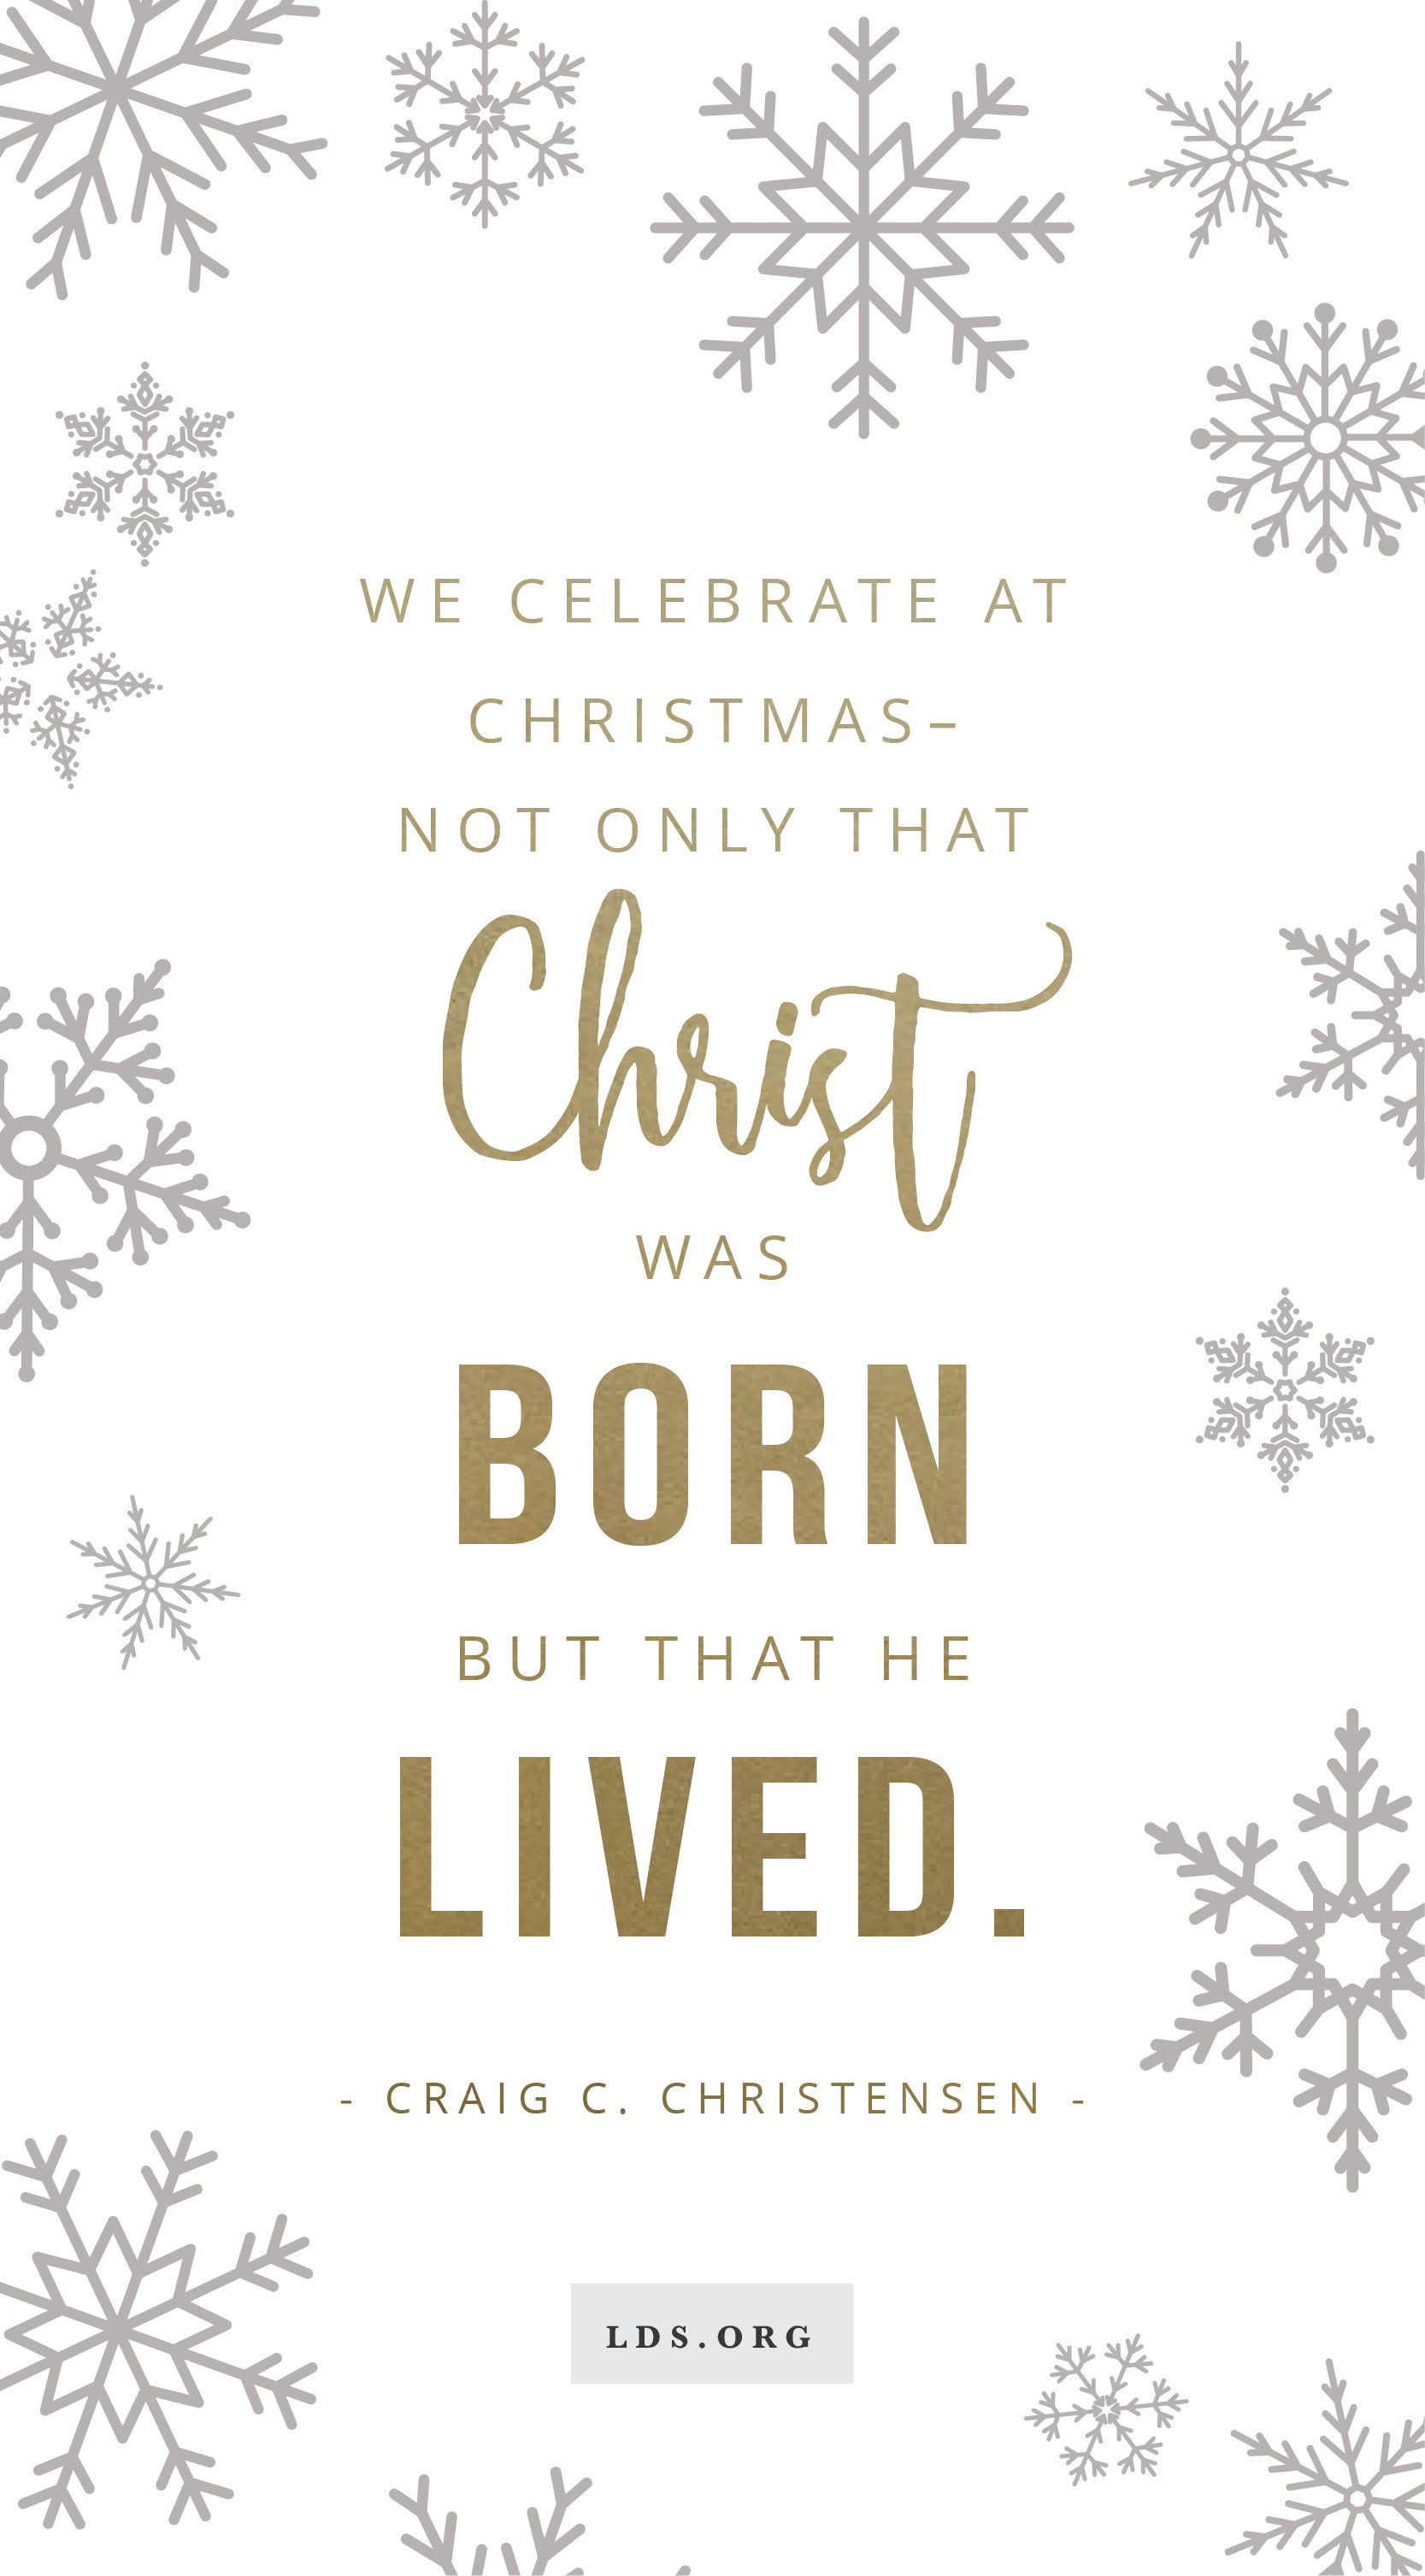 Christmas Quotes Lds
 We celebrate at Christmas—not only that Christ was born